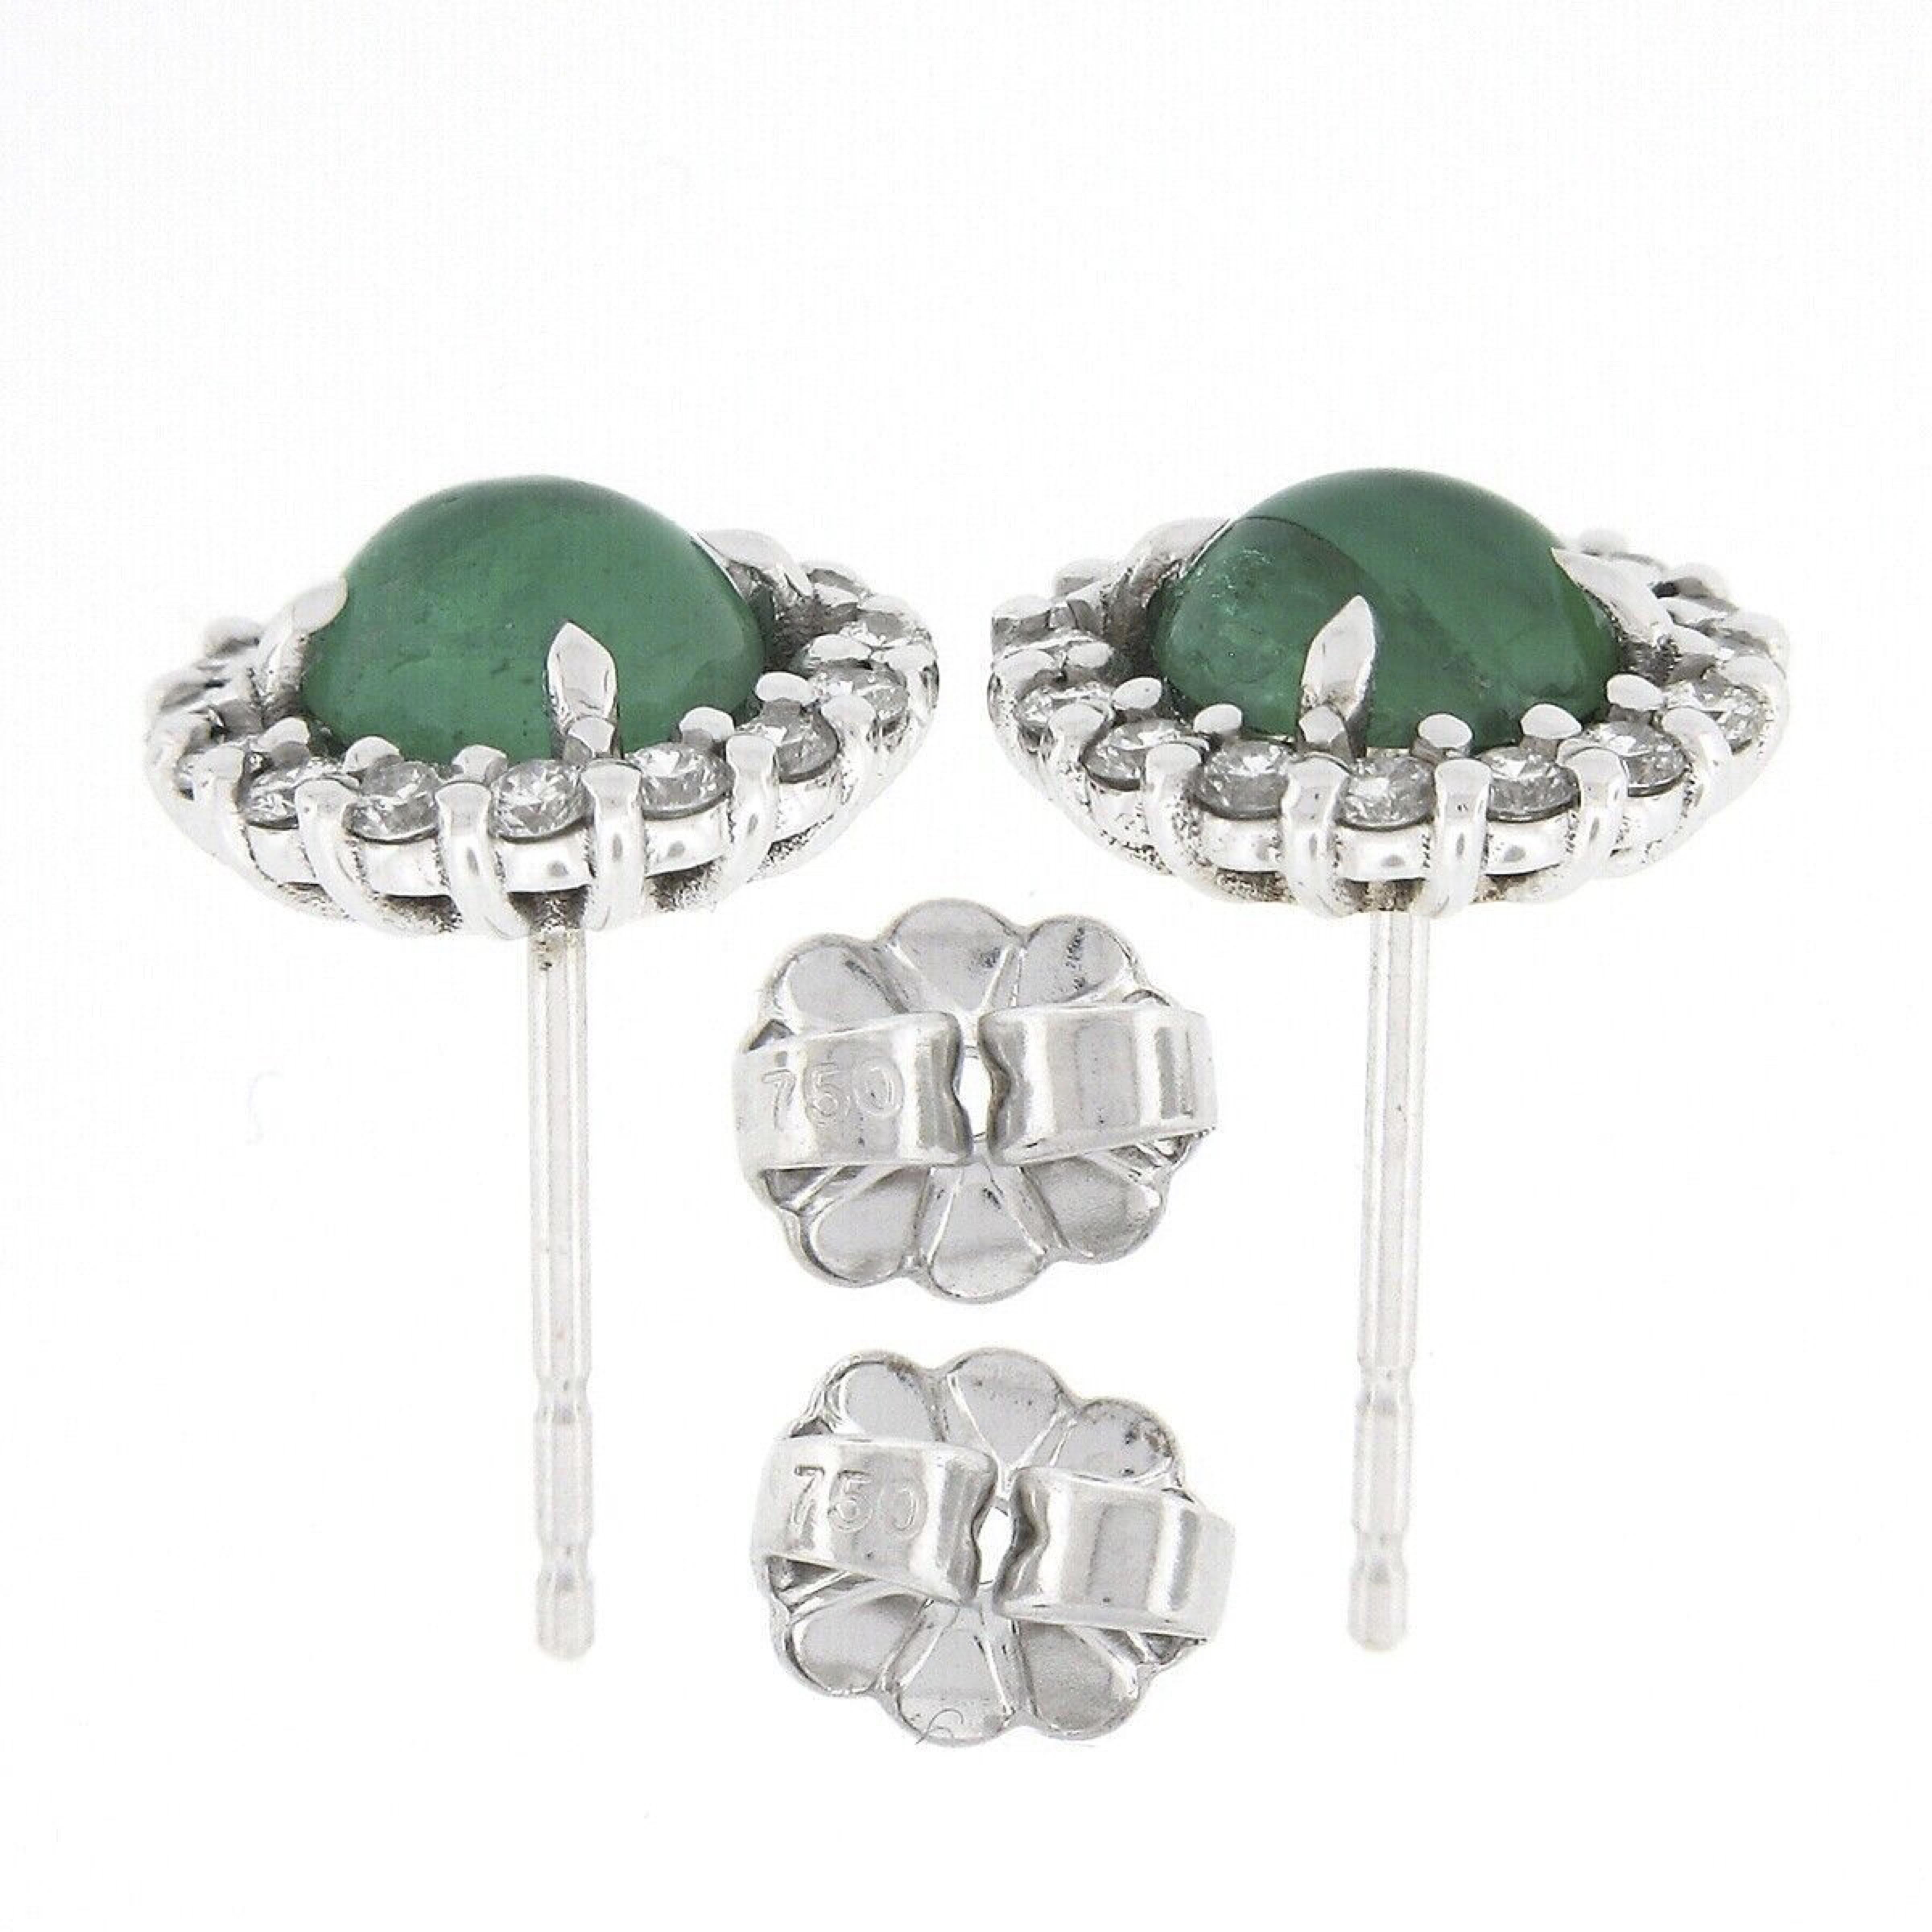 New 18k White Gold 1.72ctw Round Cabochon Emerald w/ Diamond Halo Stud Earrings For Sale 1